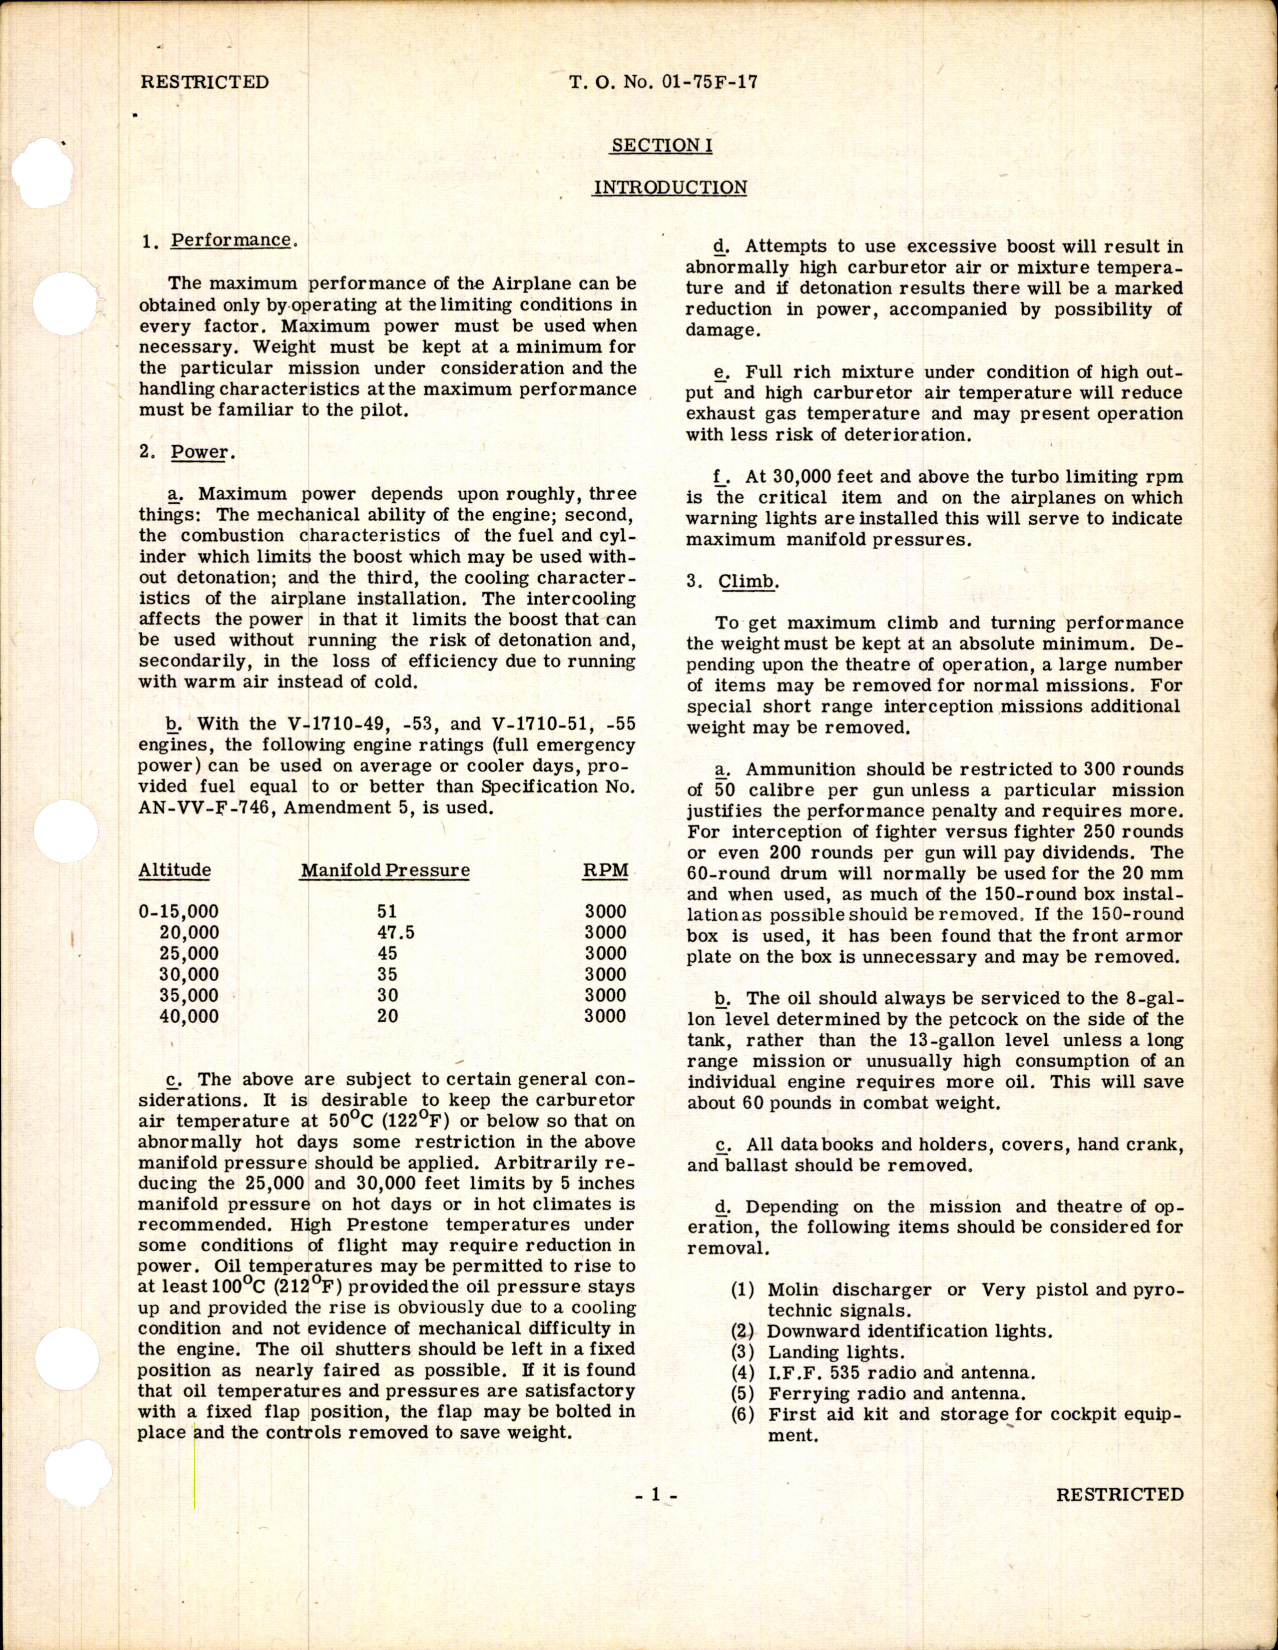 Sample page 5 from AirCorps Library document: Improvement of Combat Performance for P-38 Series